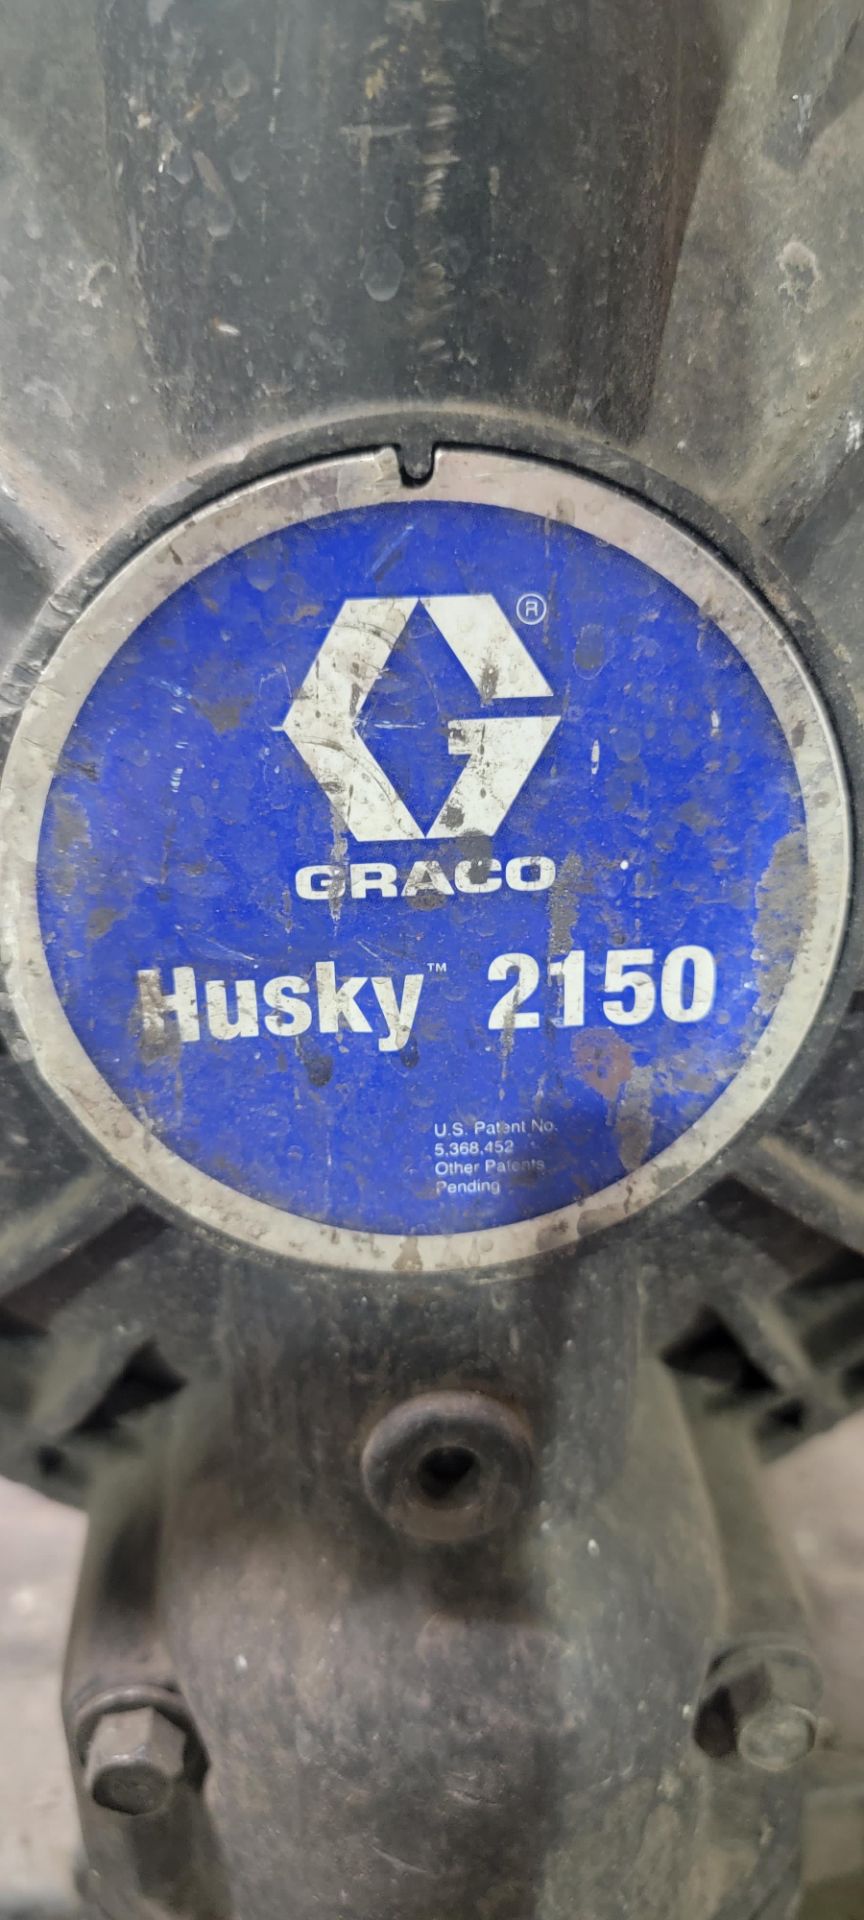 Craco Husky 2150 Pump with Cart (SOLD AS-IS - NO WARRANTY) - Image 4 of 4